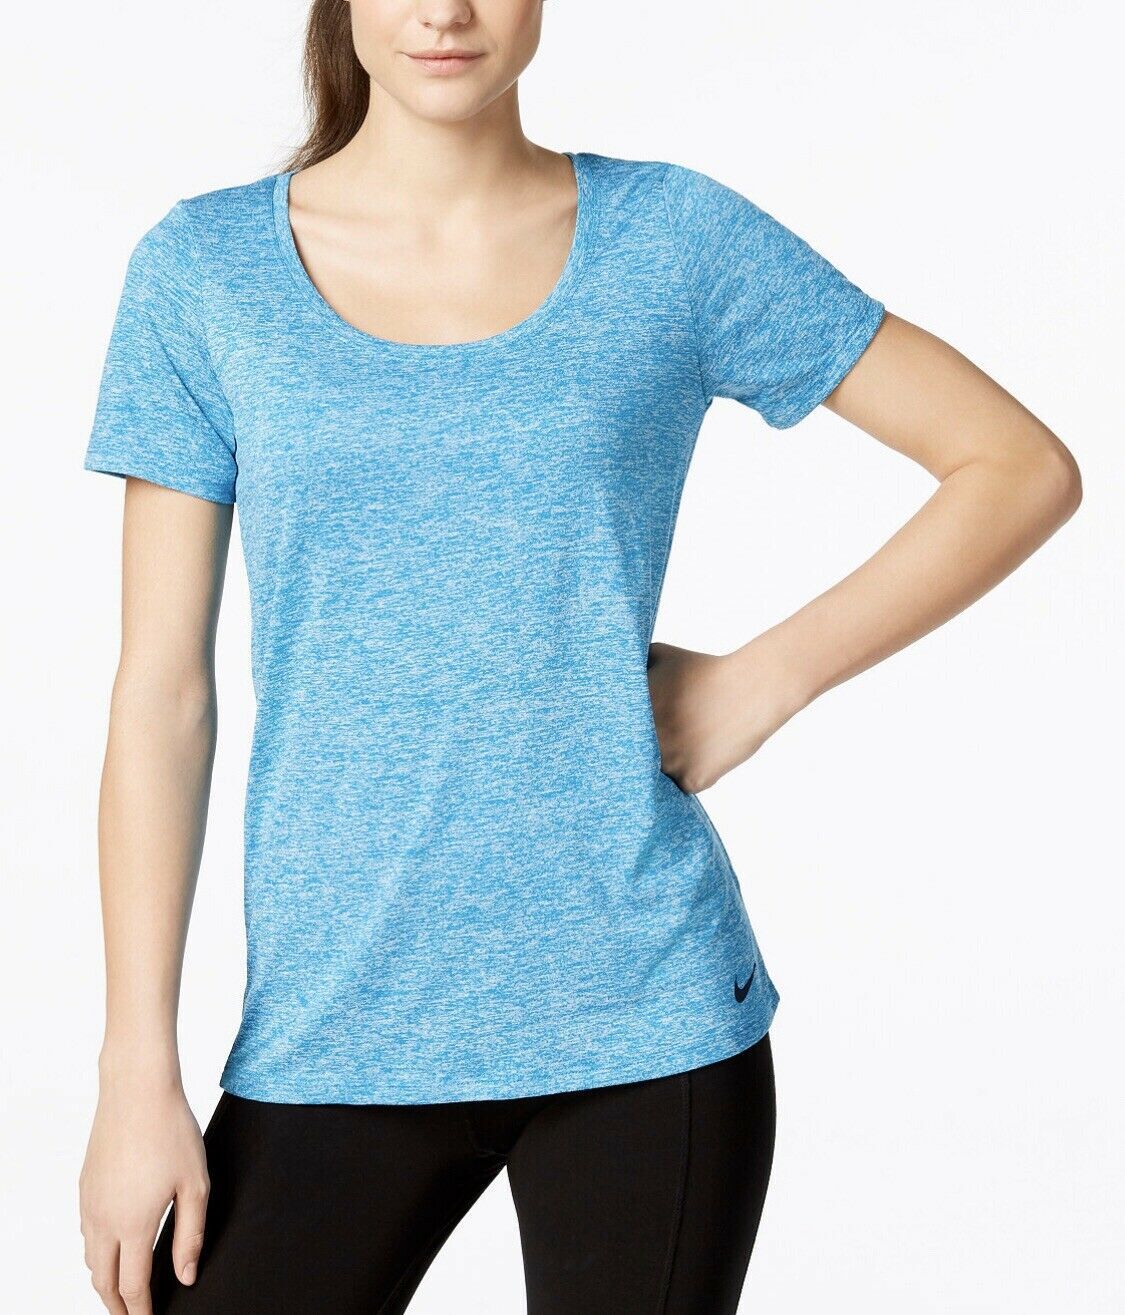 Nike Dry Legend Scoop NEck Training Top Size XS - Women's Clothing